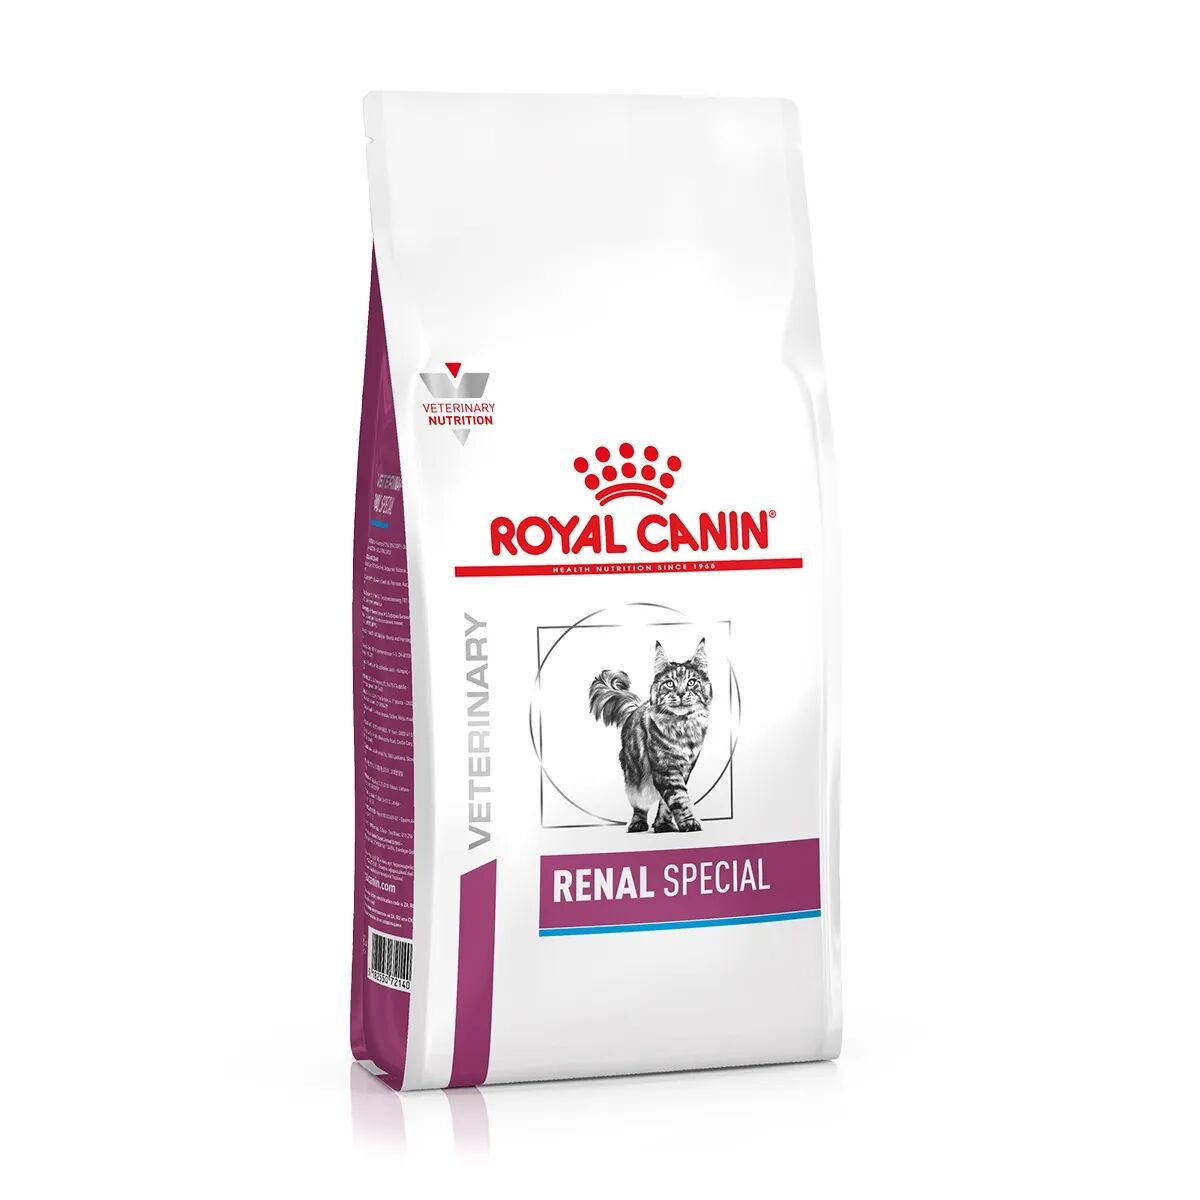 ROYAL CANIN V-Diet Renal Special Gatto 2KG